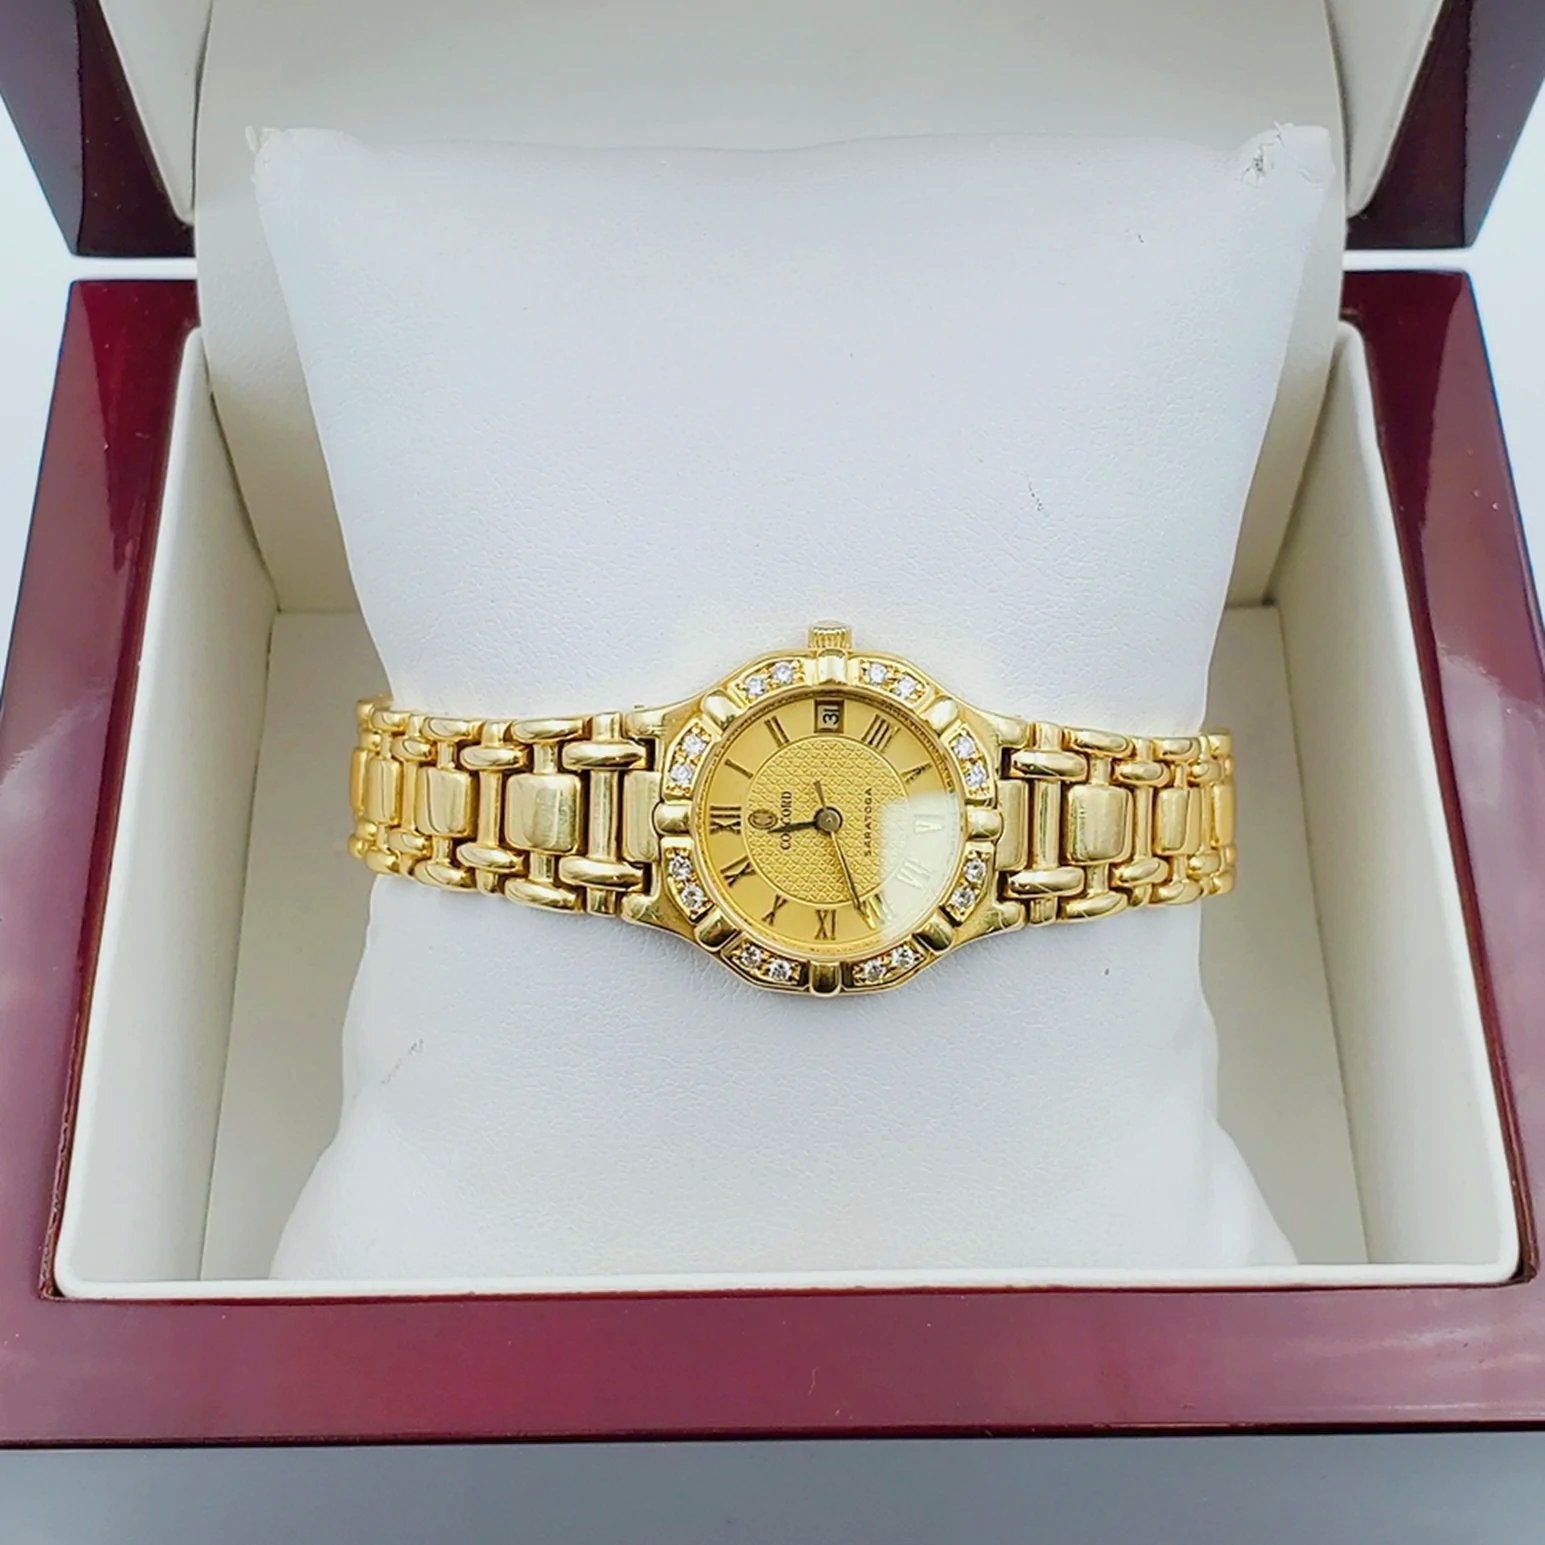 Ladies Concord Sarento 24mm Solid 18K Yellow Gold Band Watch with Roman Numeral Gold Dial and Diamond Bezel. (Pre-Owned)